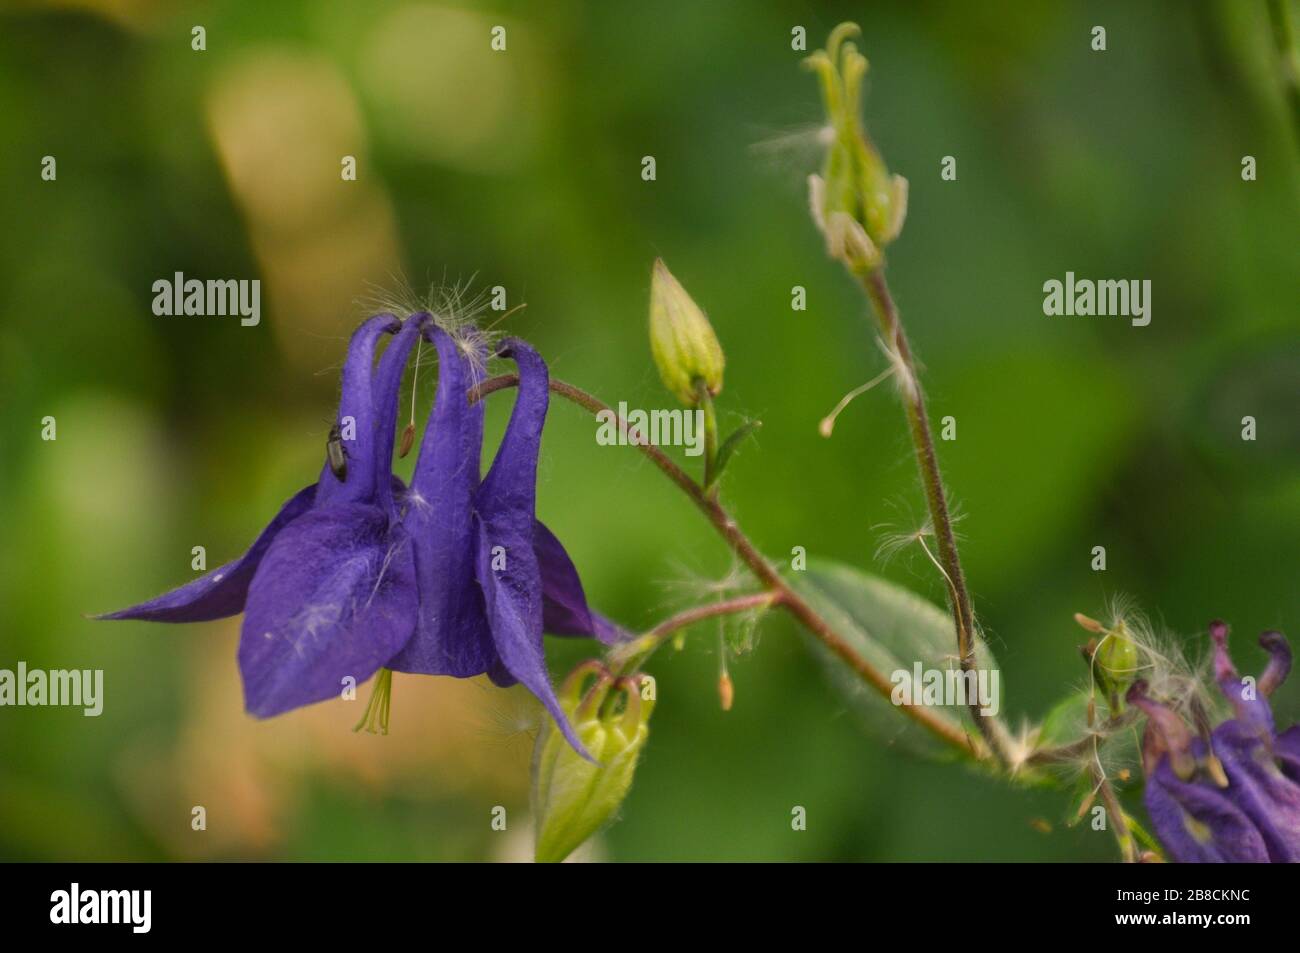 Aquilegia plant with flowers and buds close-up view. Spring garden. Stock Photo